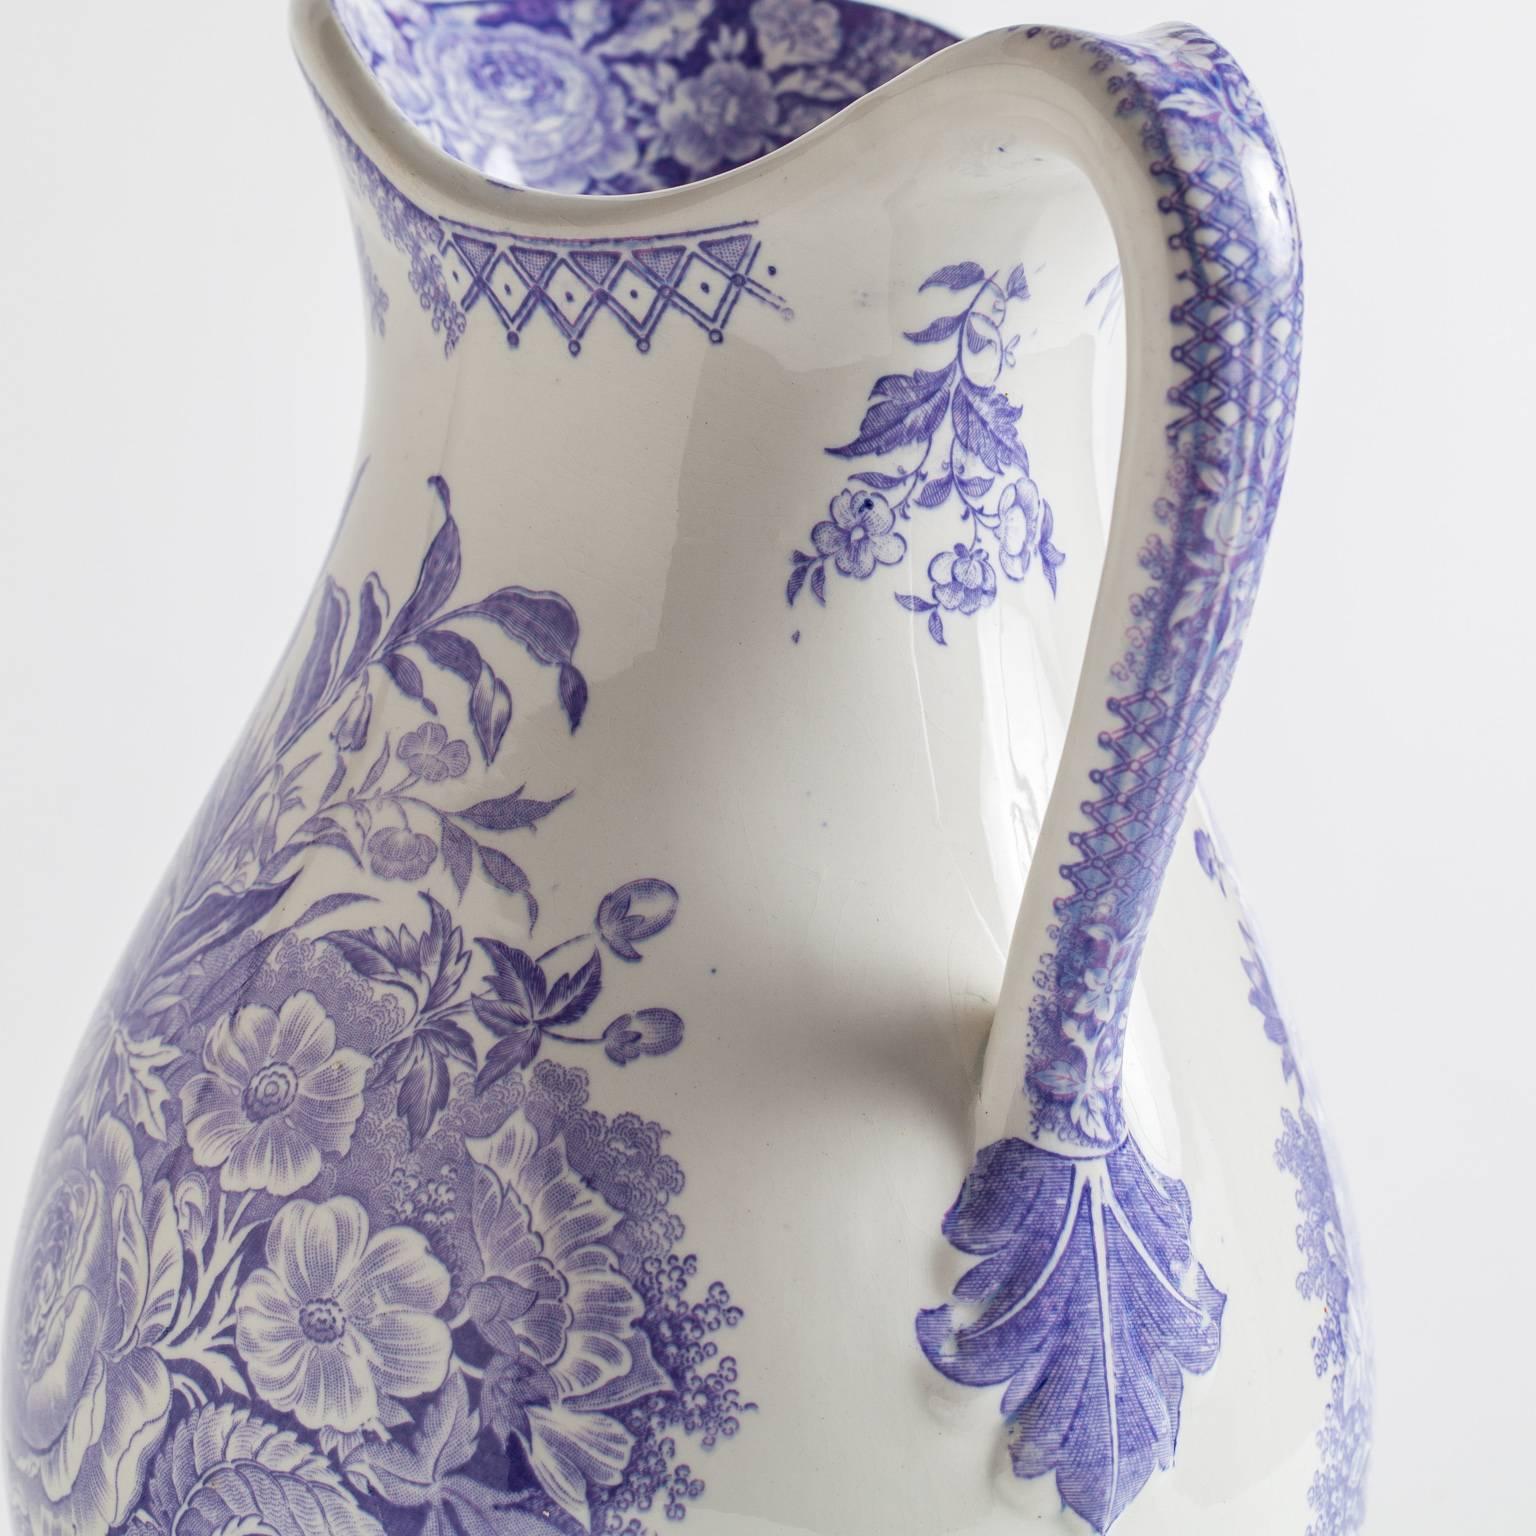 This pitcher with voluptuous bouquets of lavender blossoms is marked; “Jardiniere” Sarreguimines, France.

10.5” high
7.5” wide.